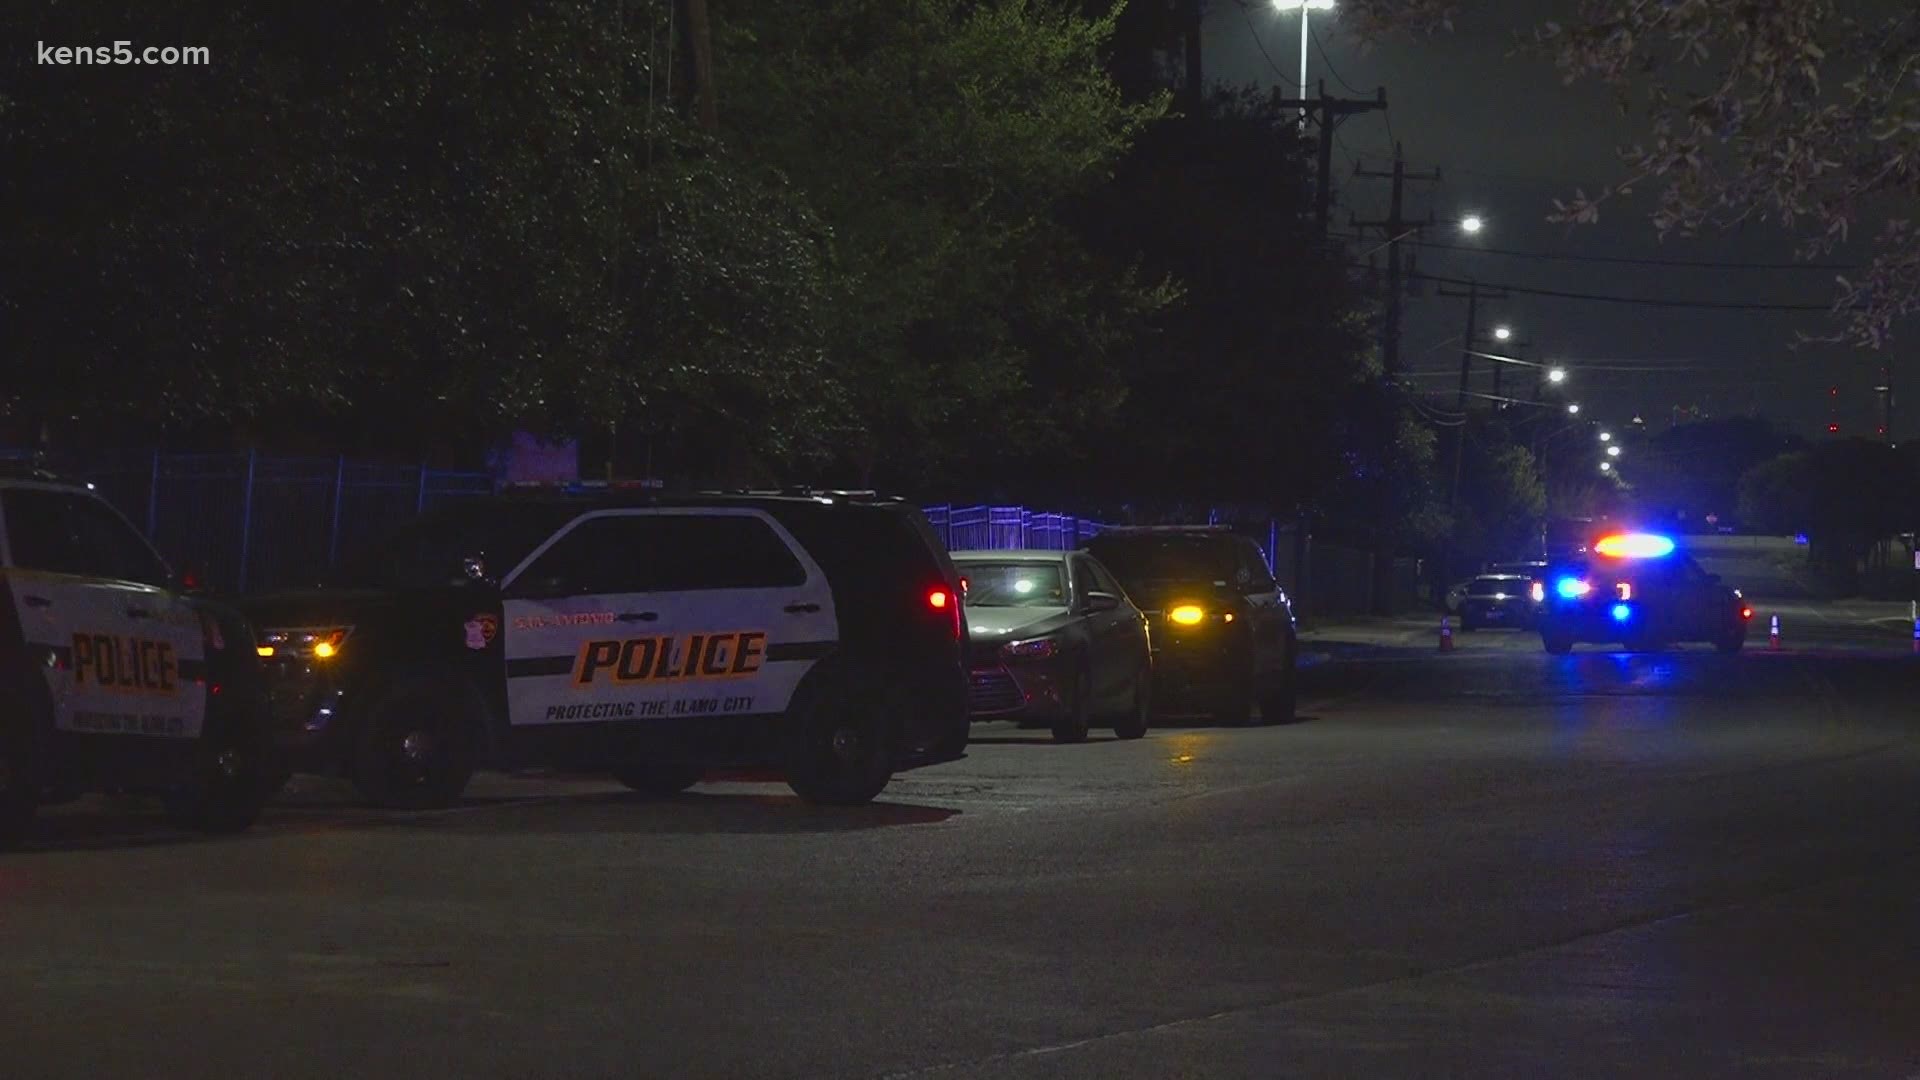 The victim has been identified as a 15-year-old boy. According to SAPD, a fight broke out inside an apartment and carried into the parking lot.